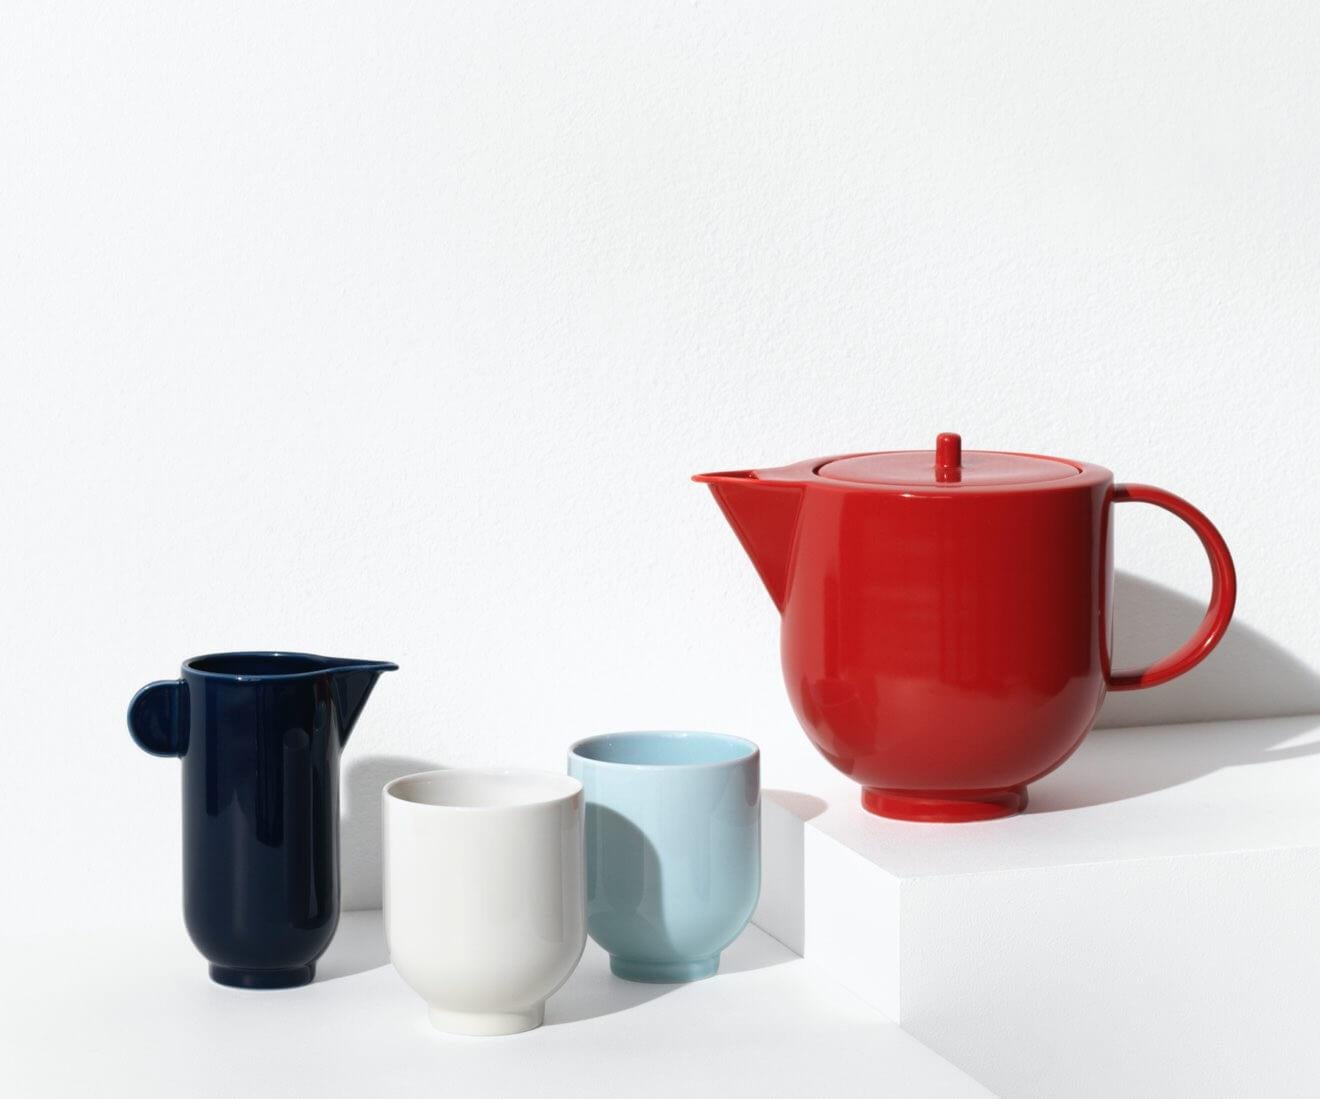 The YOKO mug is a significant and distinctive piece of tableware. Its simple, sculptural shape with a firm, sharp edges challenges the soft material of porcelain.

The mug is available in eggshell white and light blue. It contains 0,23L

YOKO is a